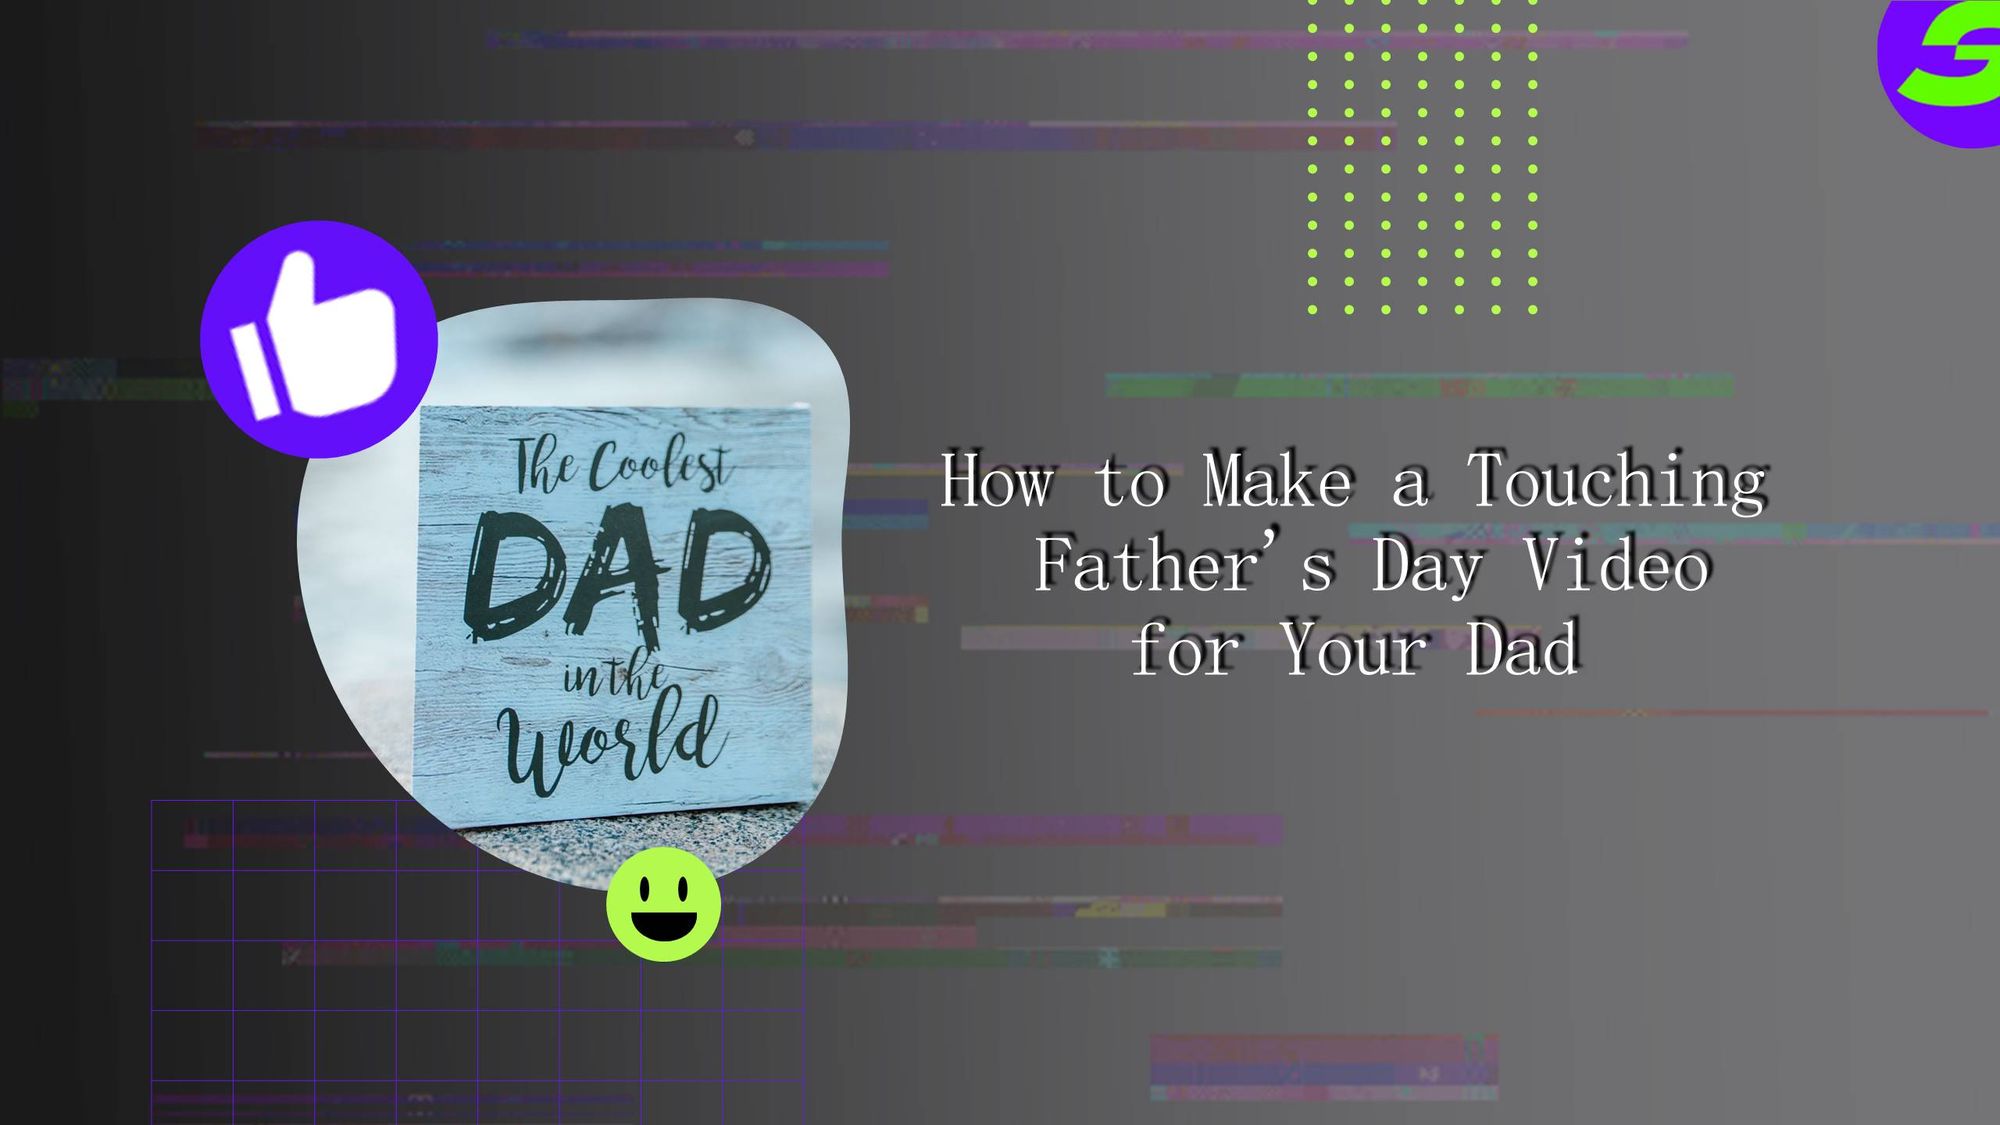 How to Make a Touching Father's Day Video with a free video editor